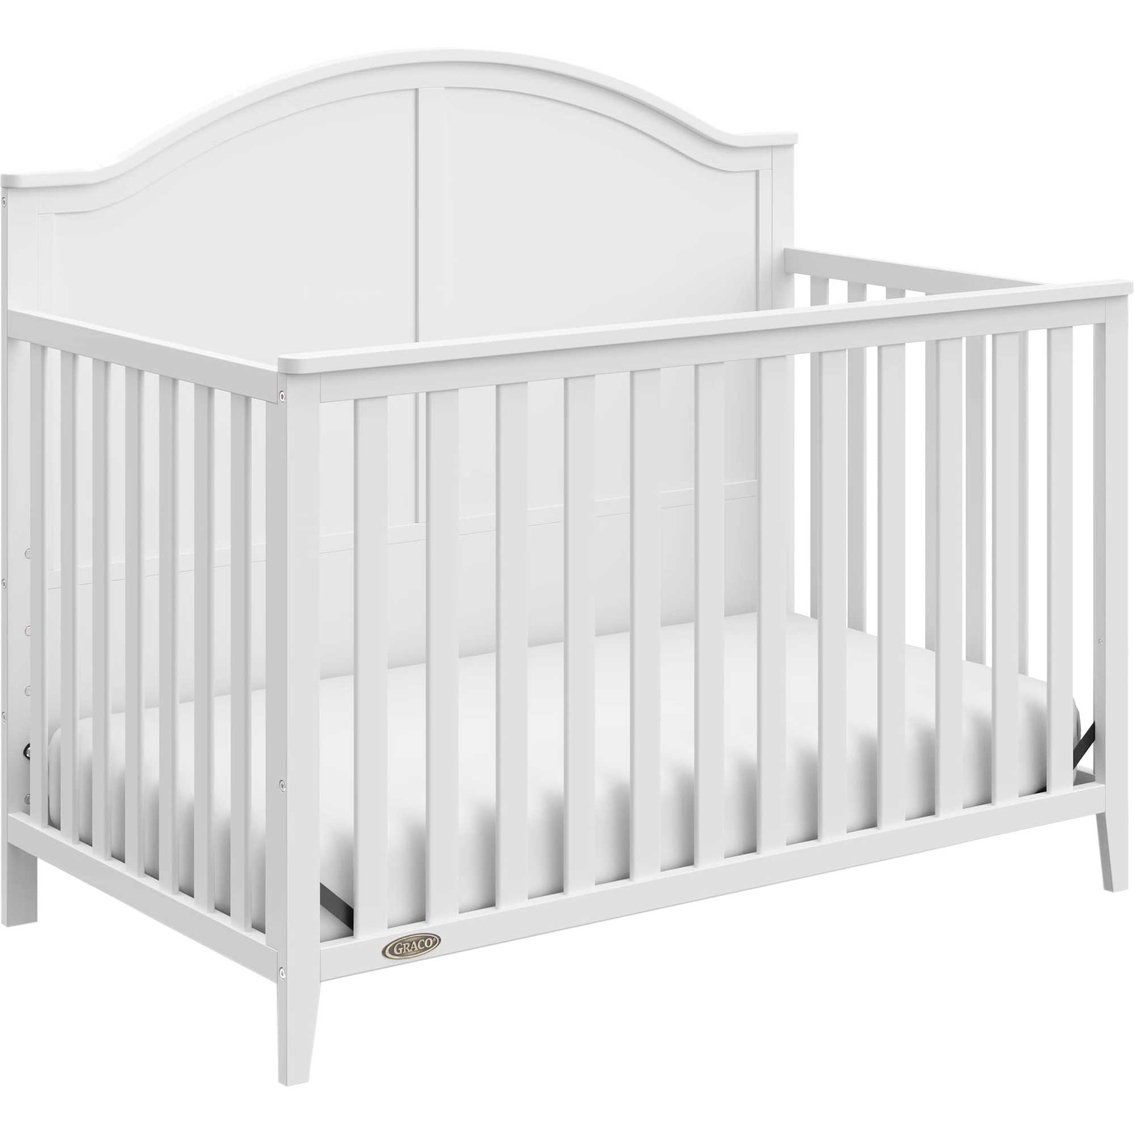 Graco Wilfred 5 in 1 Convertible Crib - Image 2 of 7